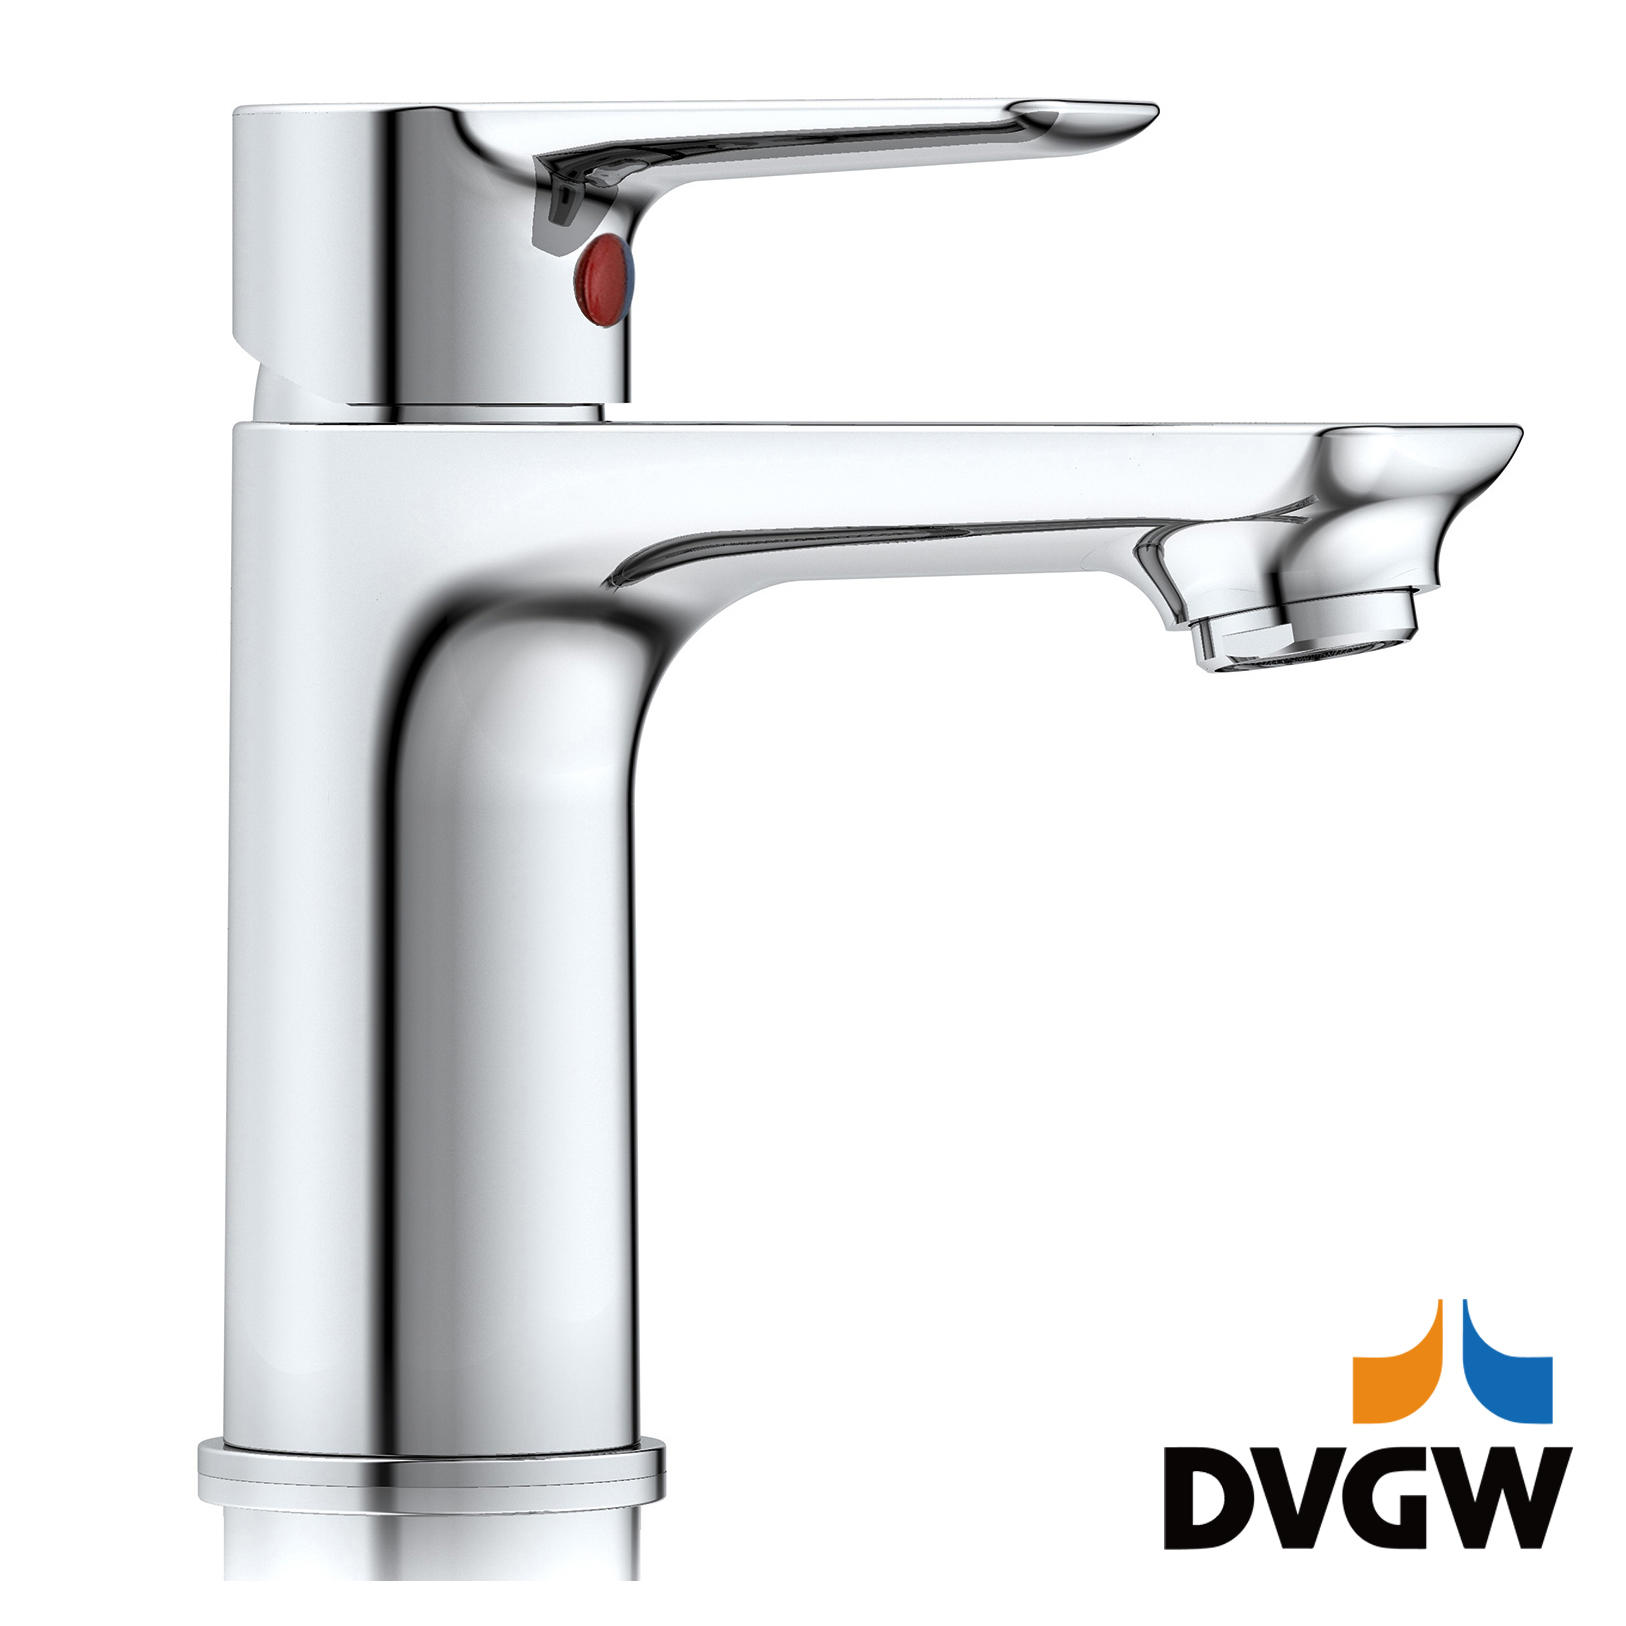 3187-30	DVGW certified, brass faucet single lever hot/cold water deck-mounted basin mixer